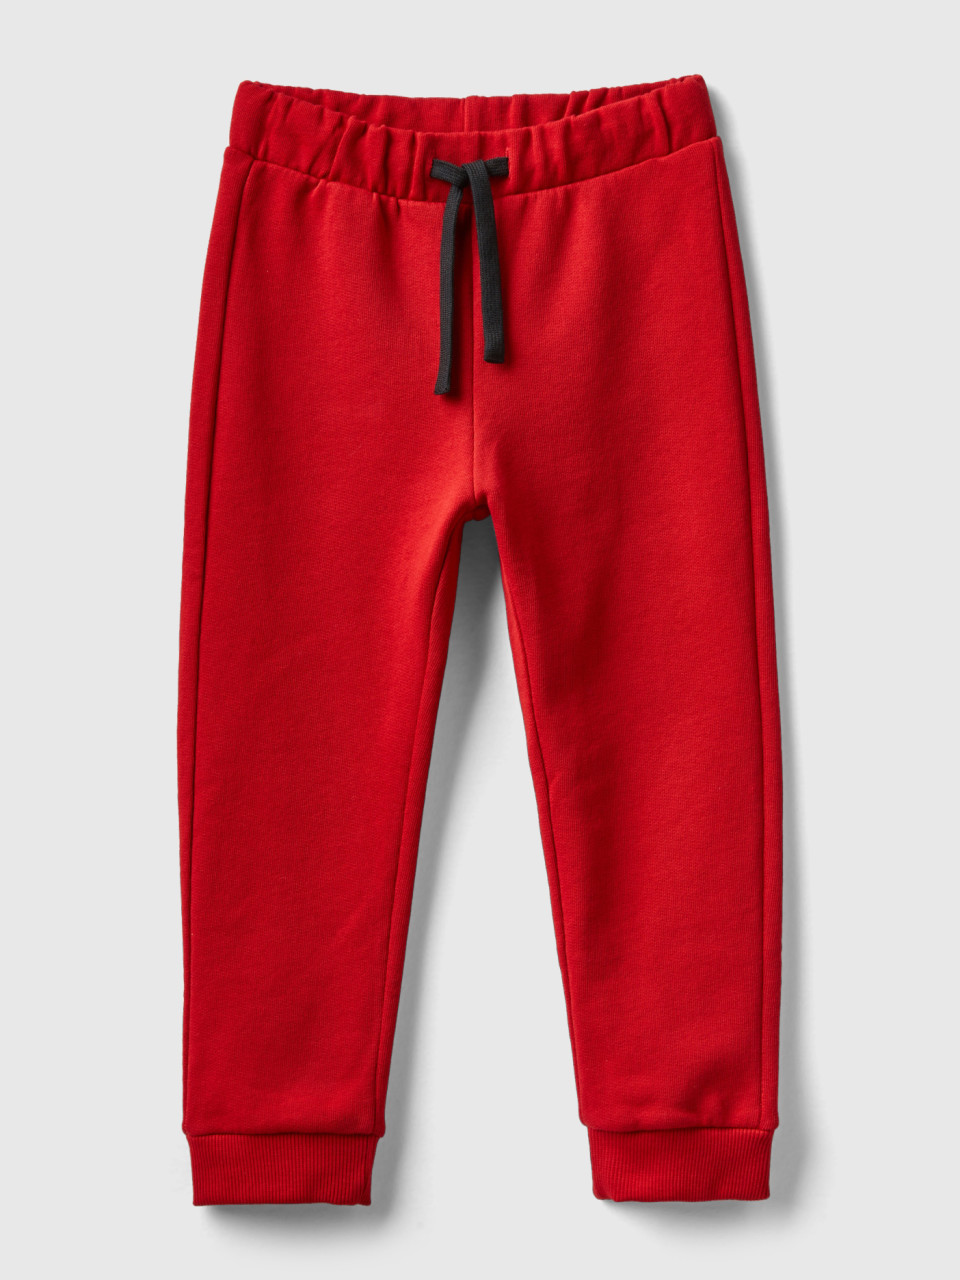 Benetton, Sweatpants With Pocket, Red, Kids